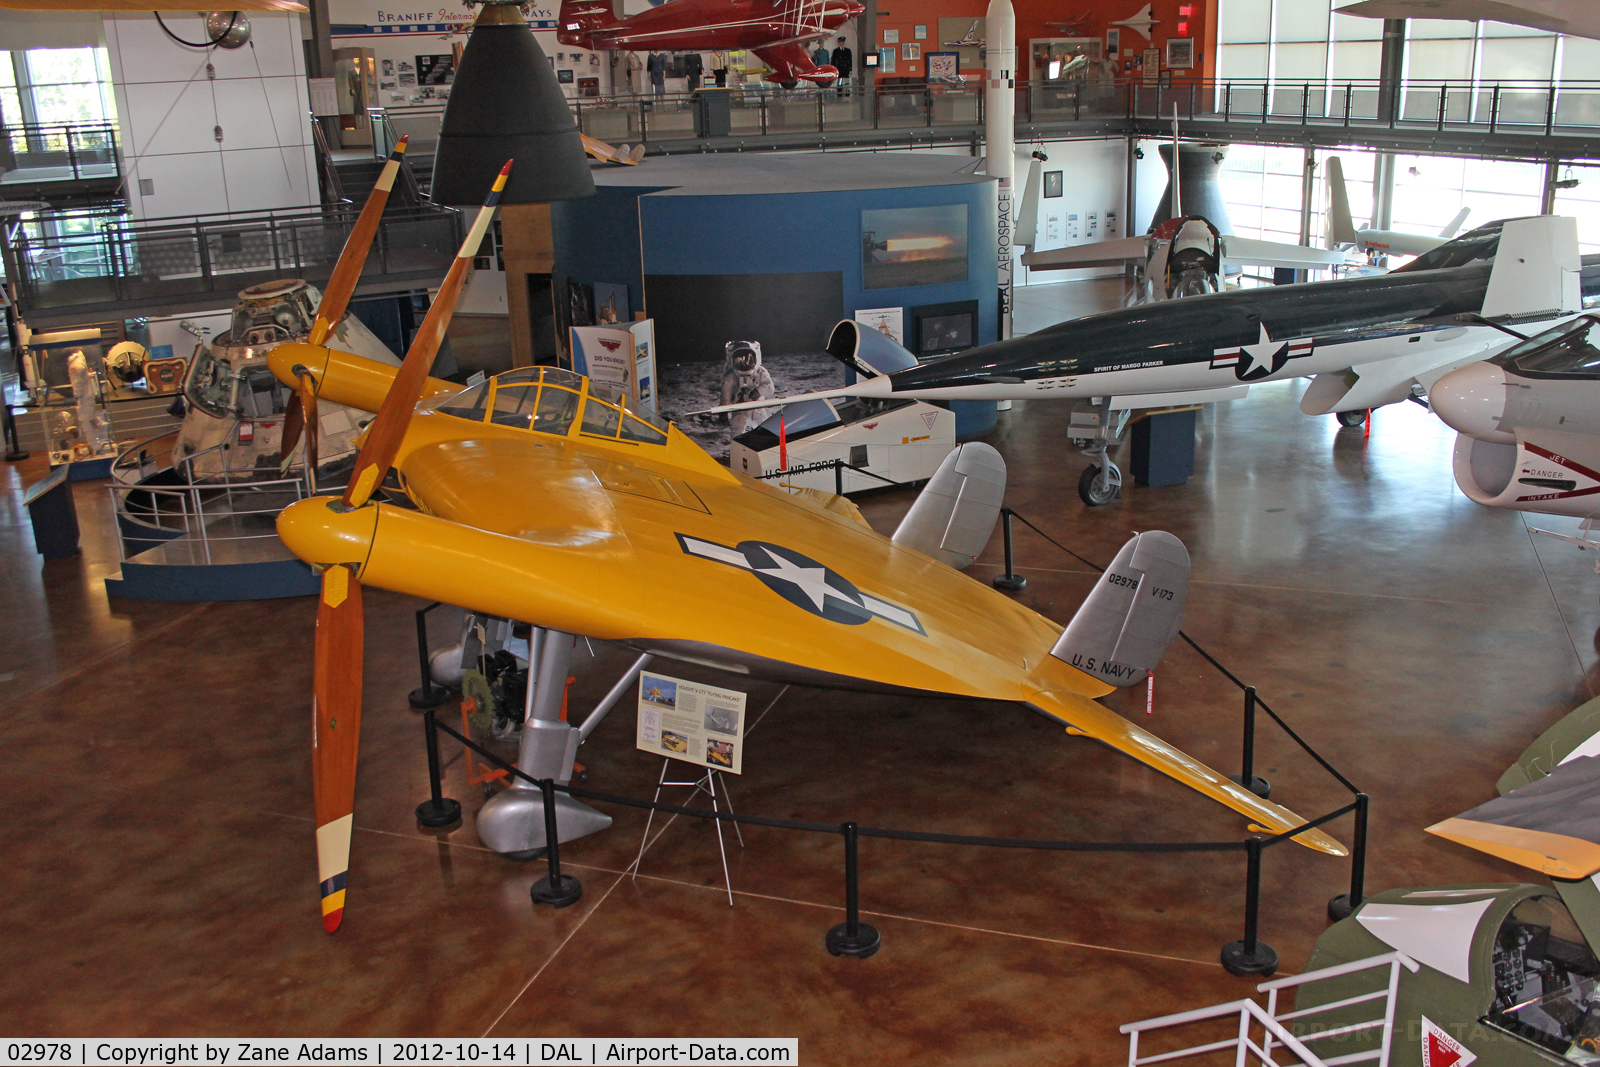 02978, 1942 Vought V-173 C/N 1, The Flying Pancake on display at the Frontiers of Flight Museum - Dallas, Texas